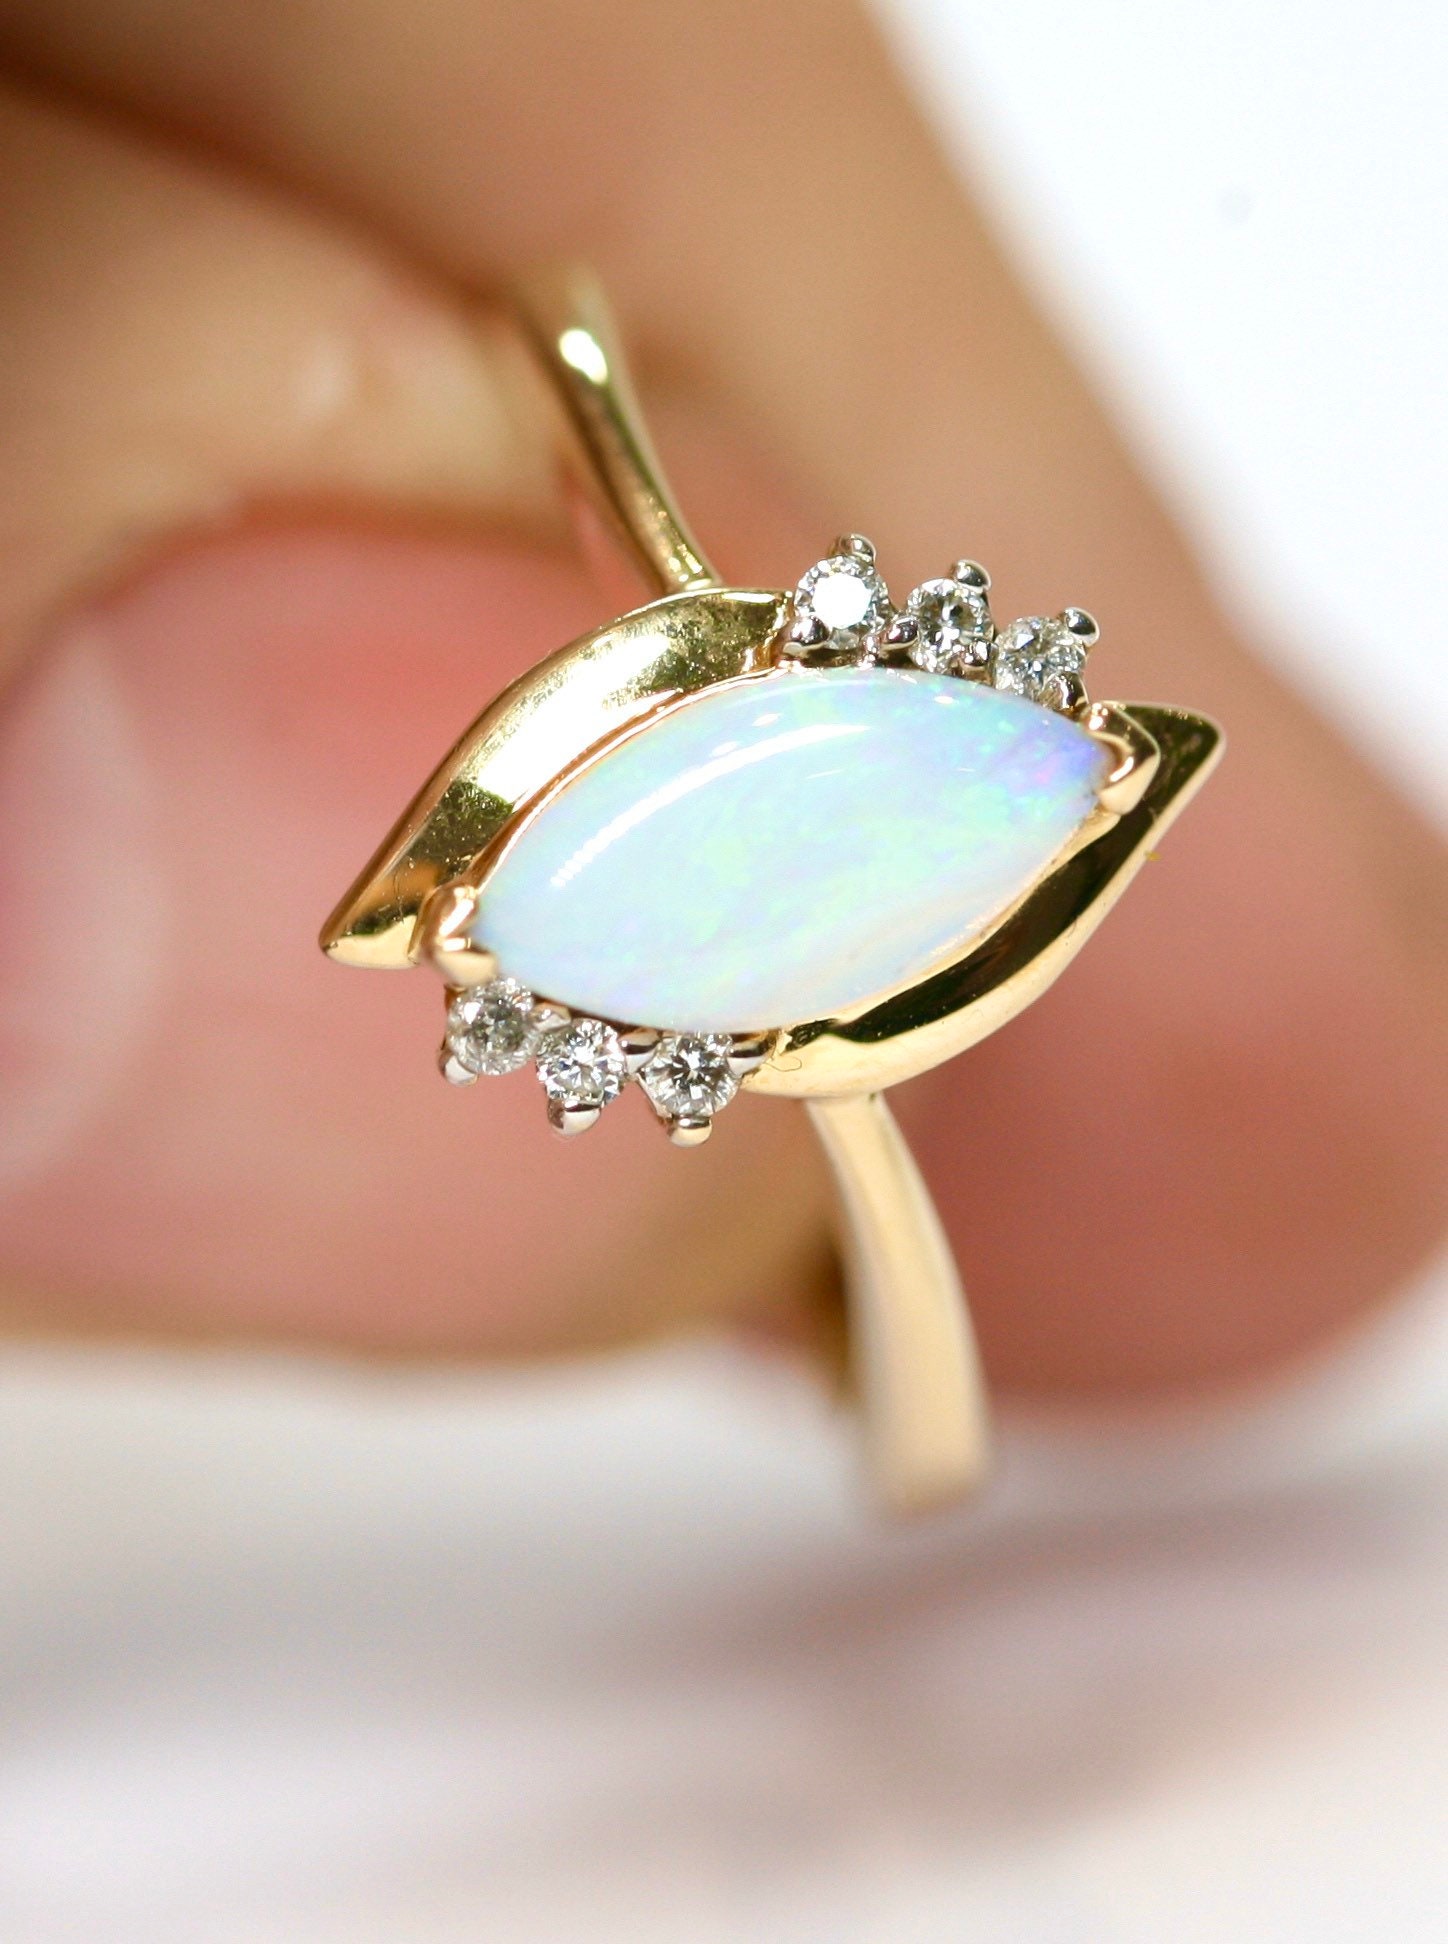 Stunning Vintage 14k Yellow Gold Opal And Diamond Ring Size O Or Us 7 